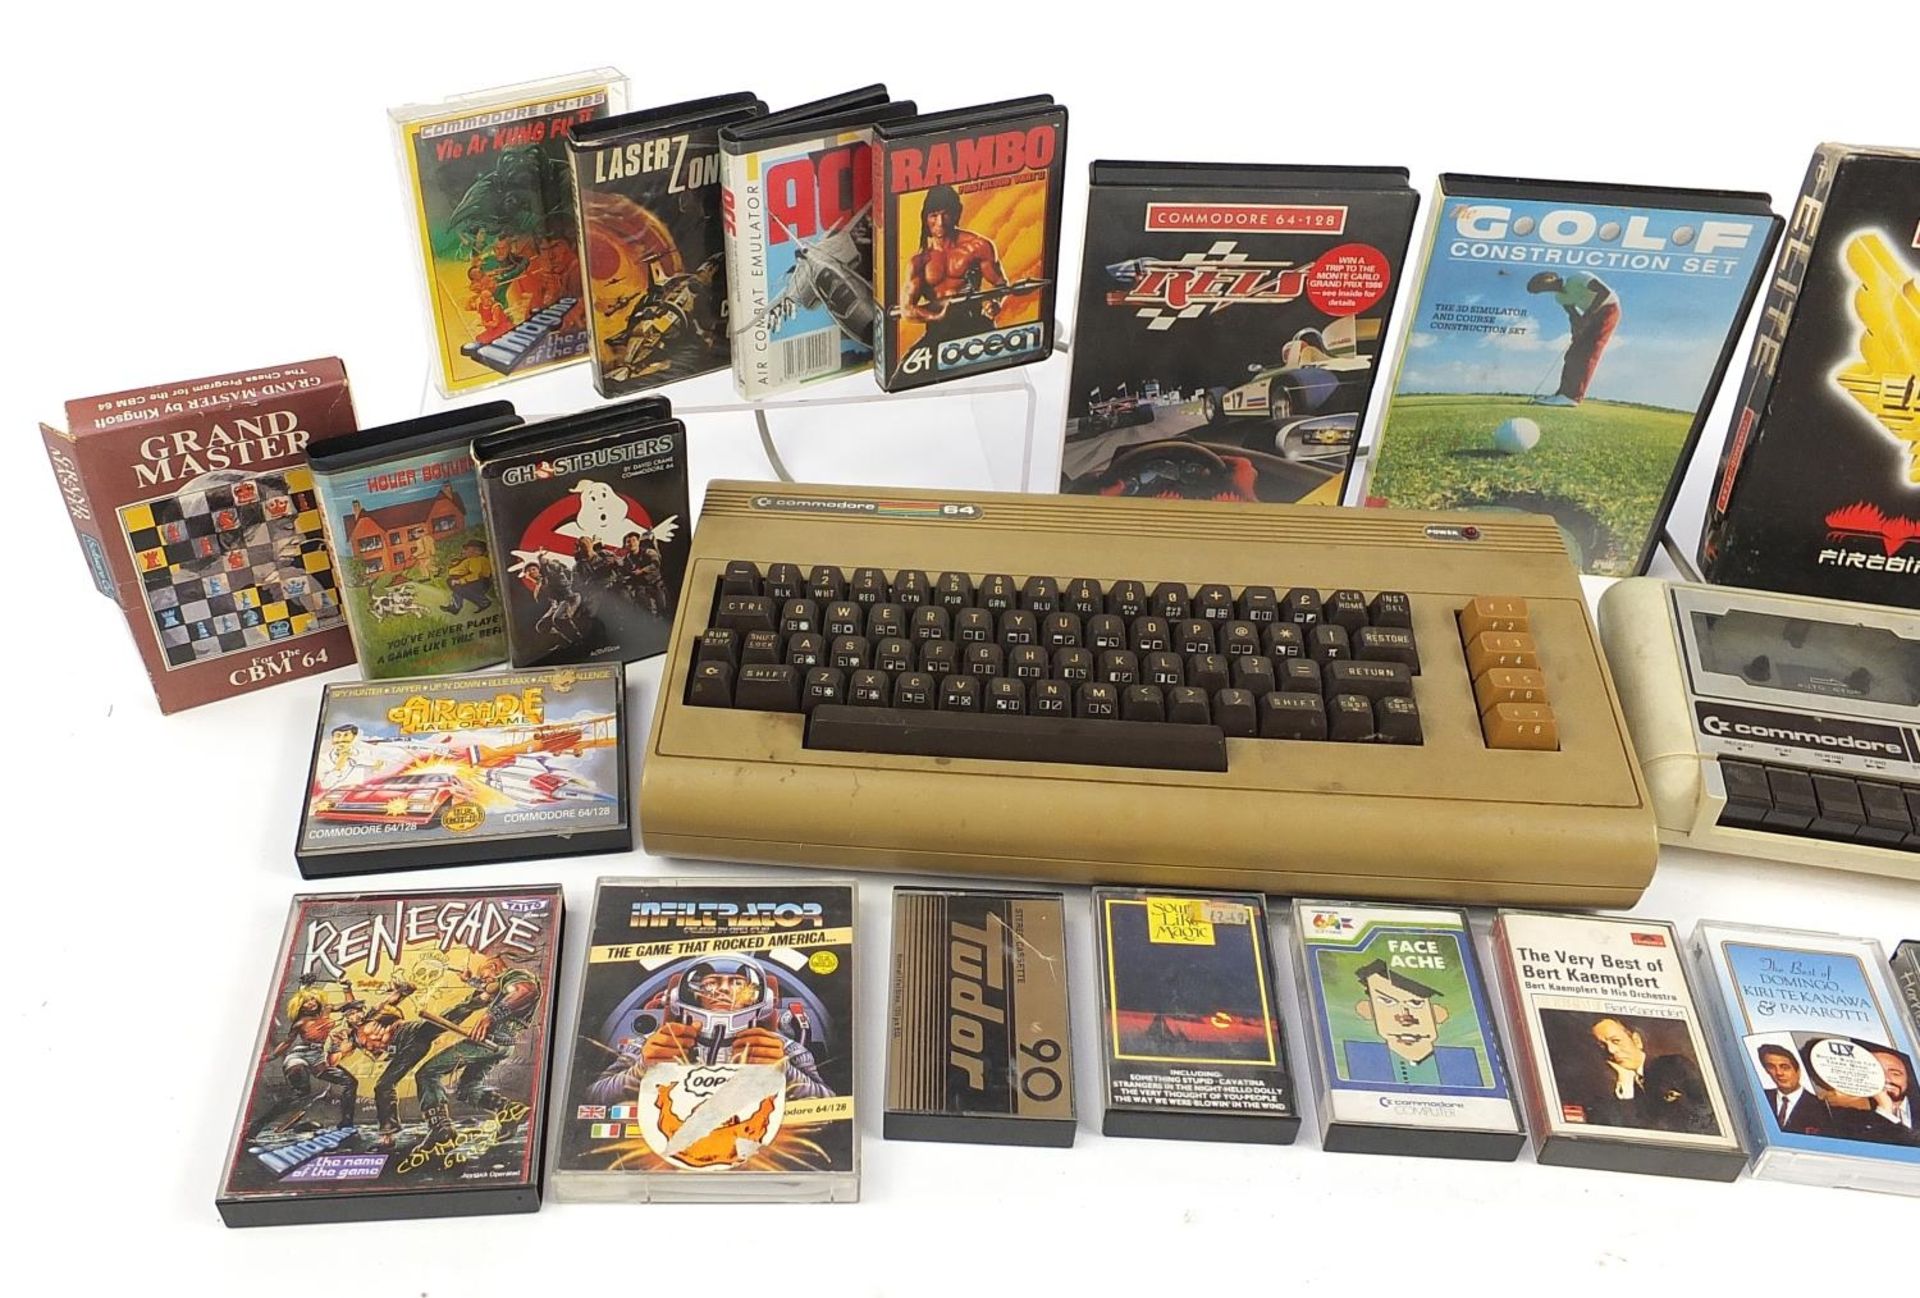 Vintage Commodore 64 console with a collection of games - Image 2 of 3